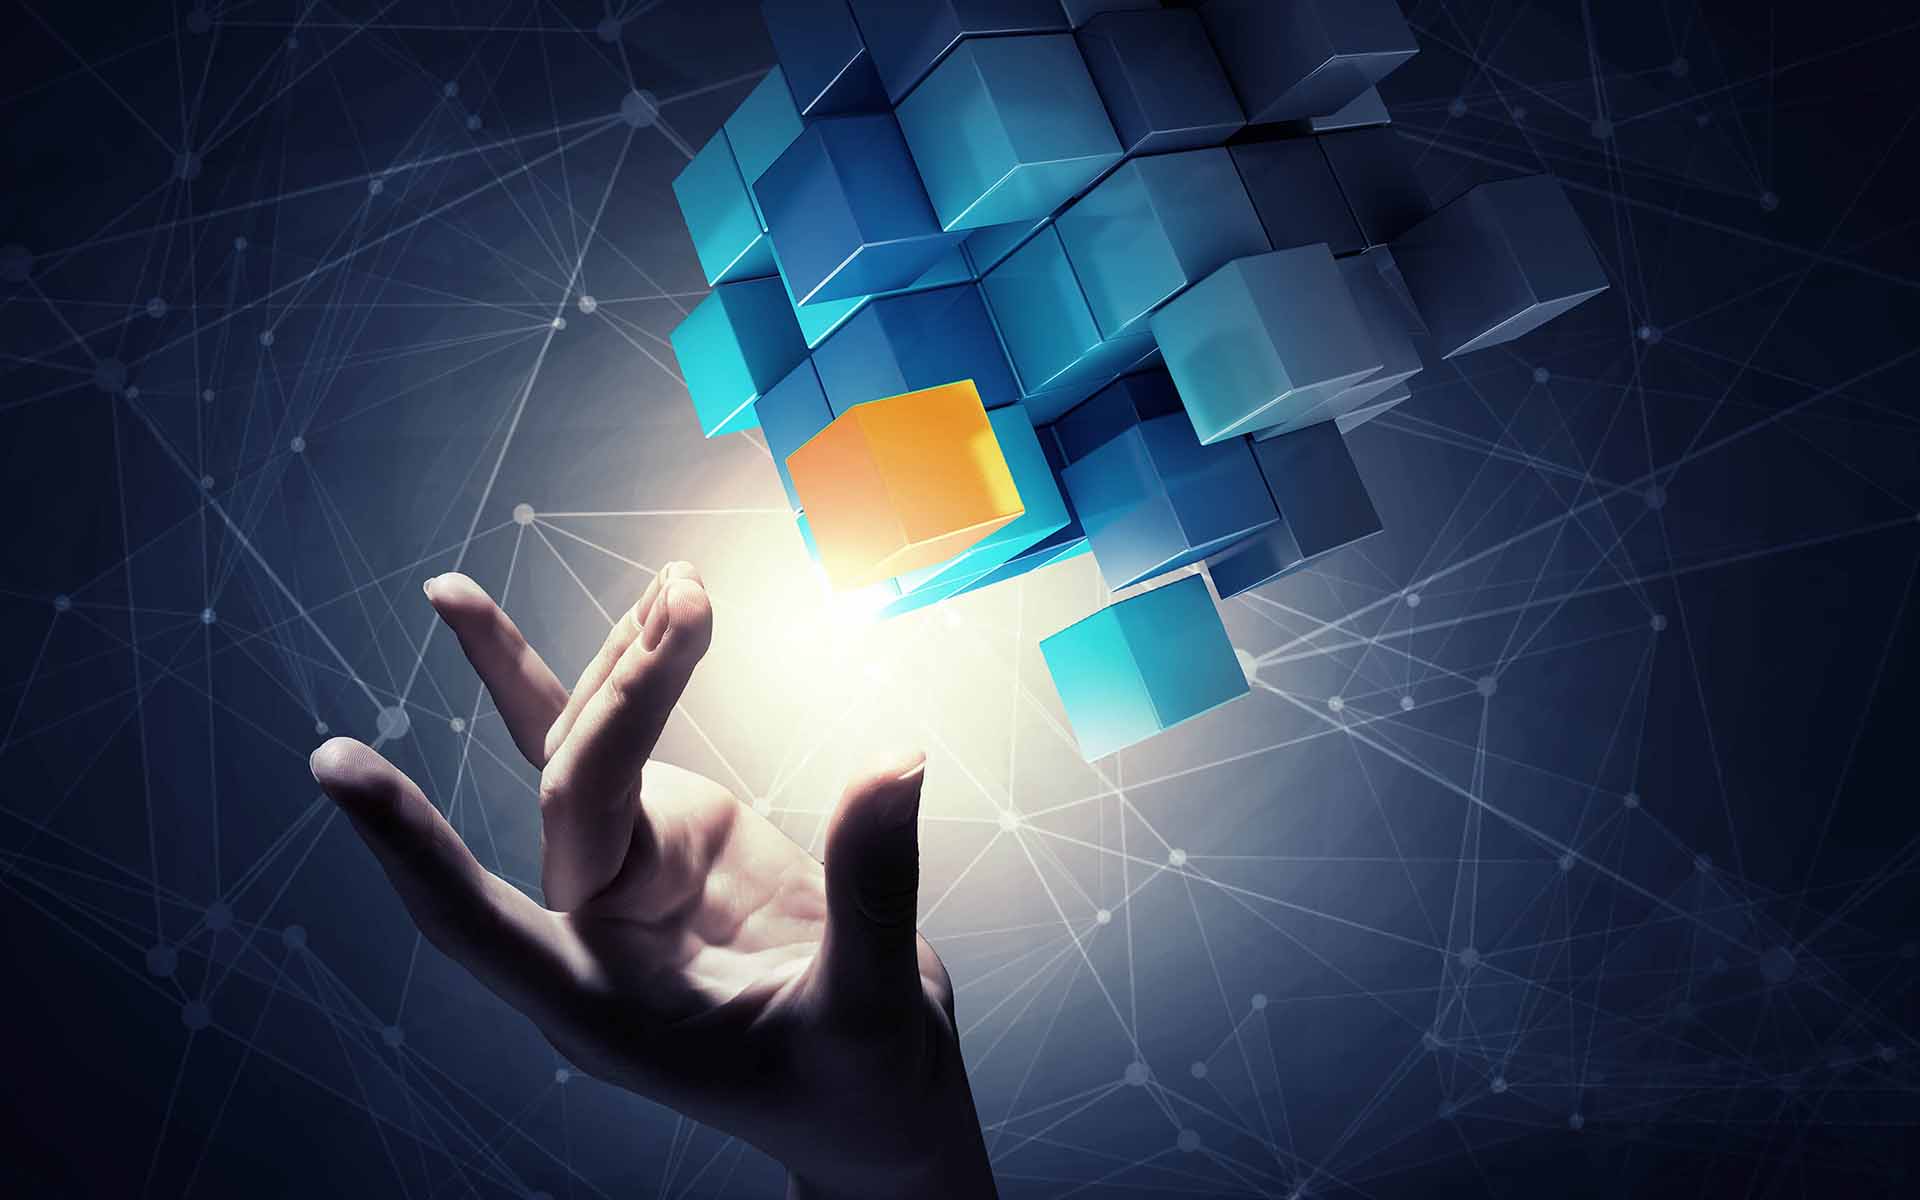 Blockchain Technology is Gaining Ground - But Not Where You'd Expect